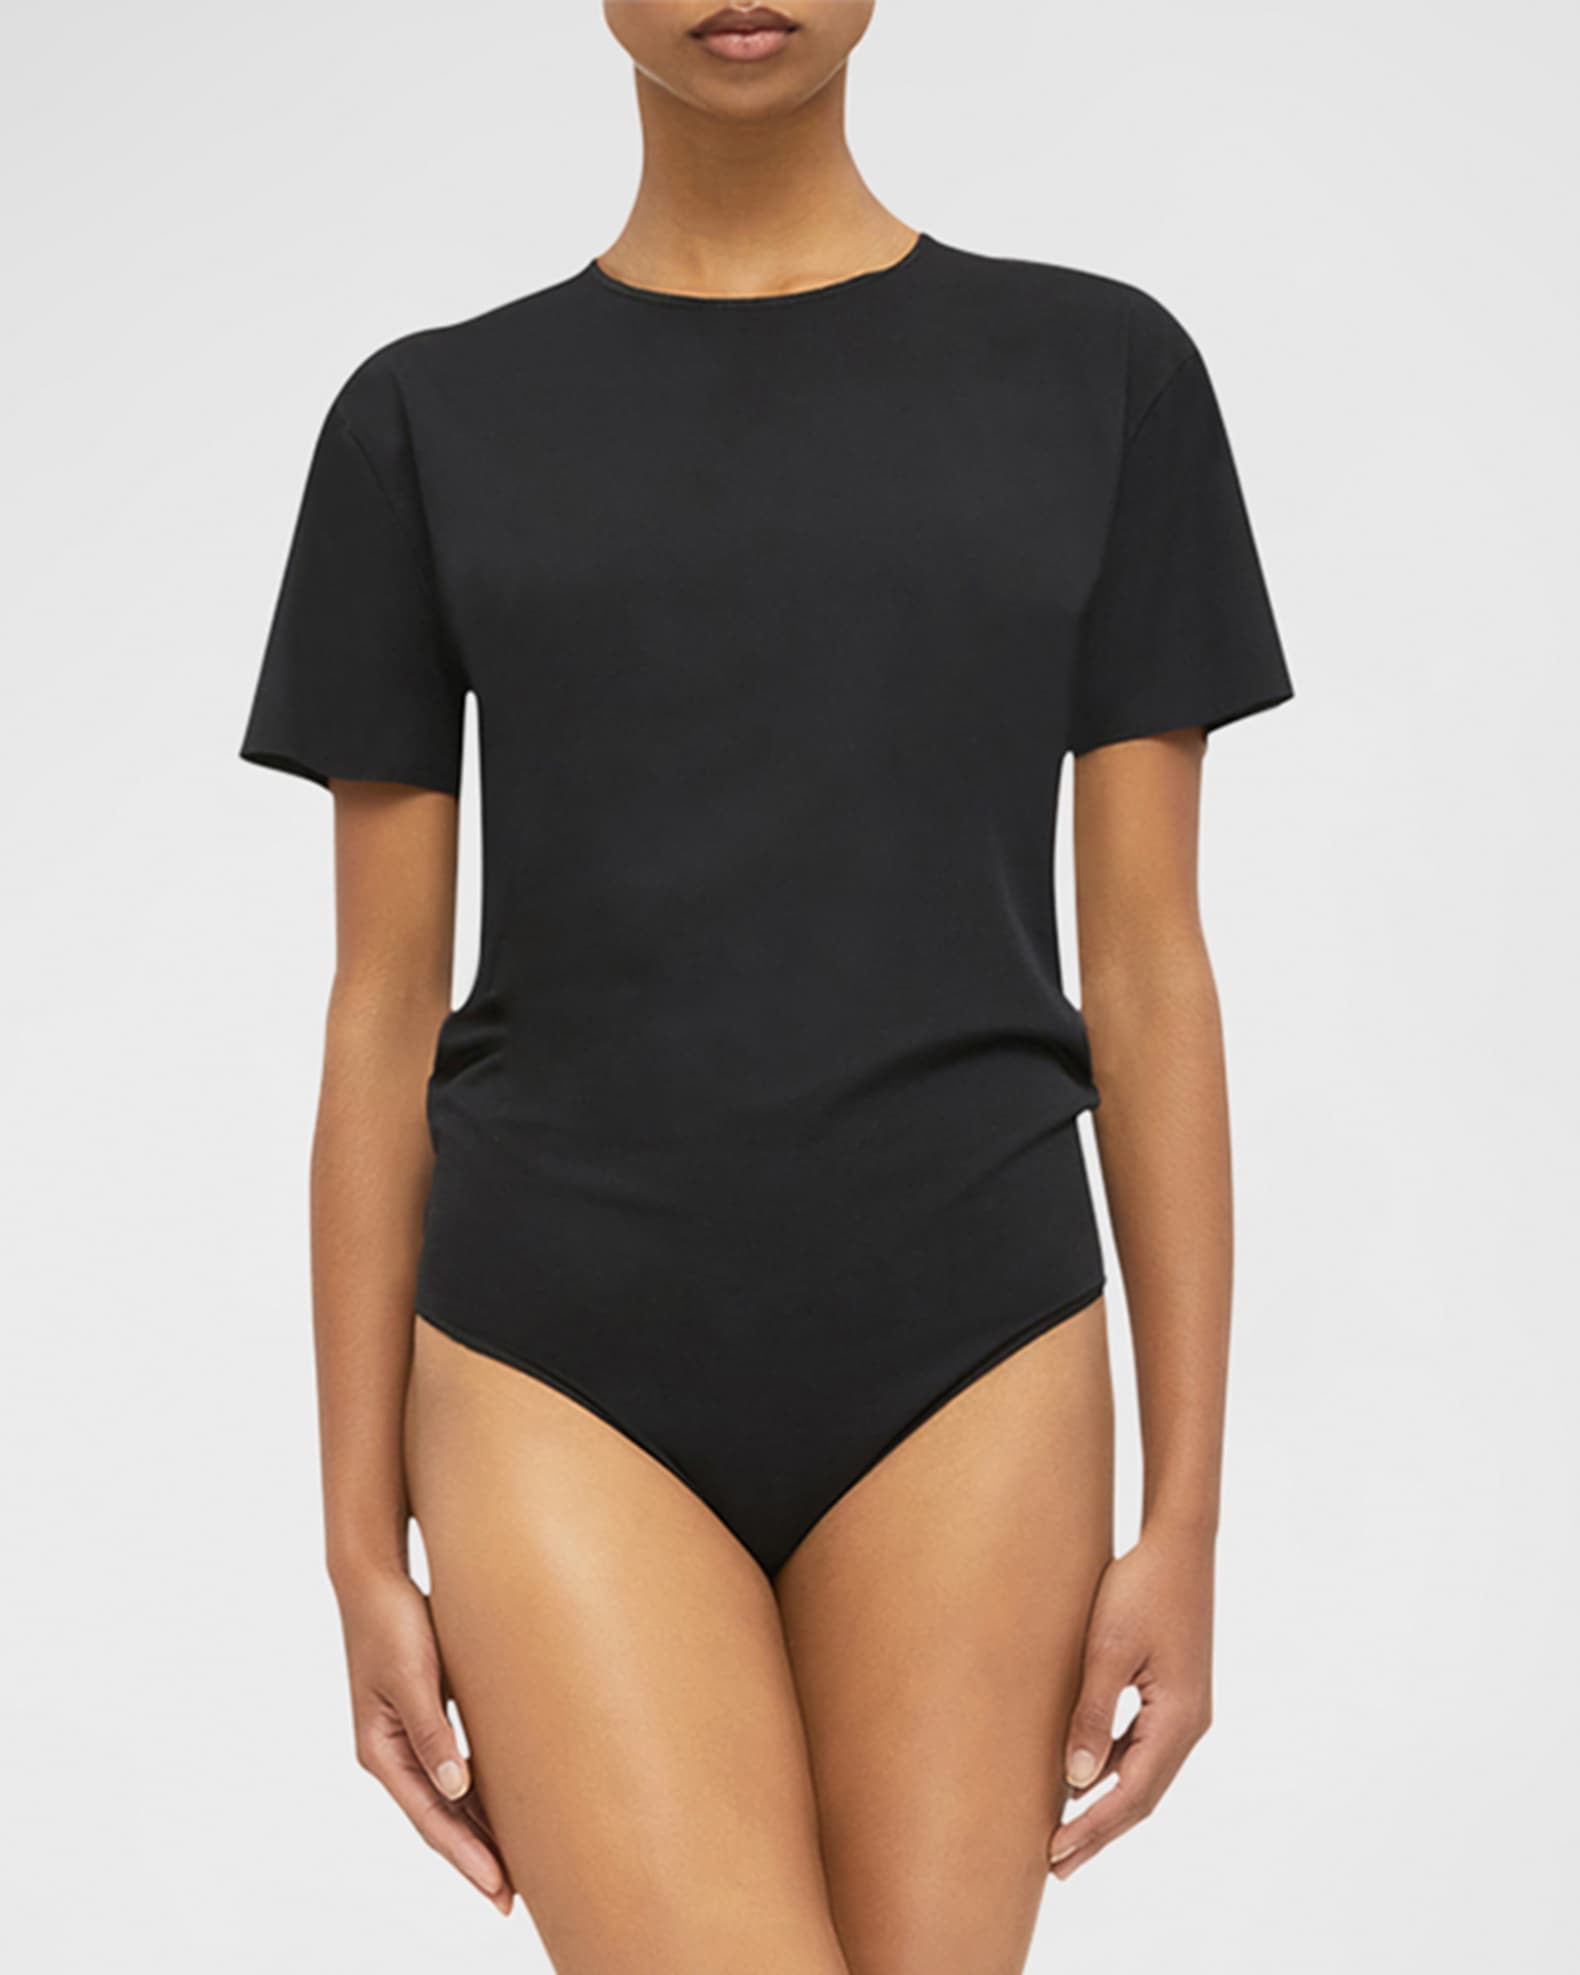 The Round Neck Body  Wolford United States